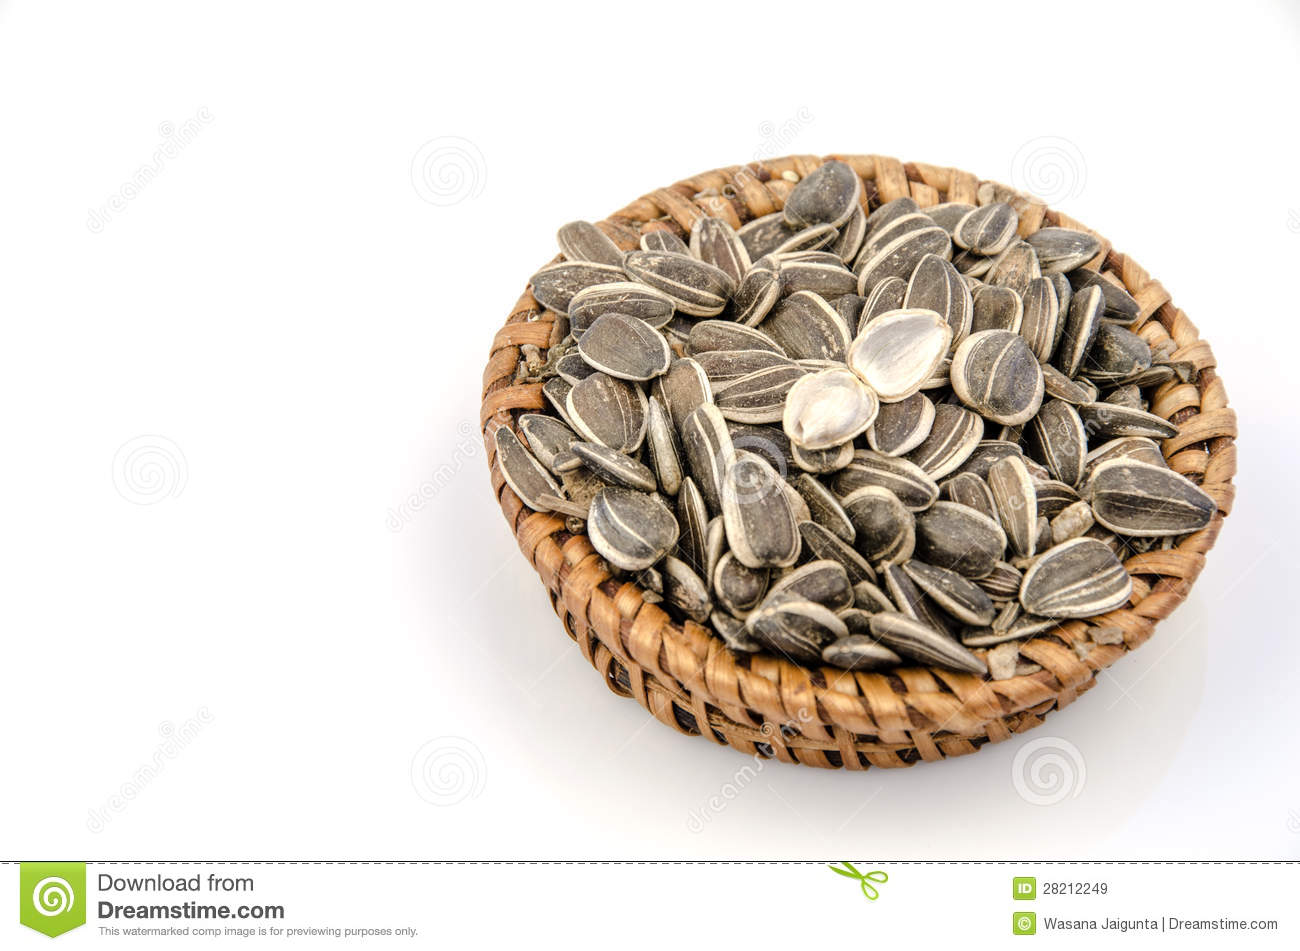 Sunflower Seeds Royalty Free Stock Images   Image  28212249